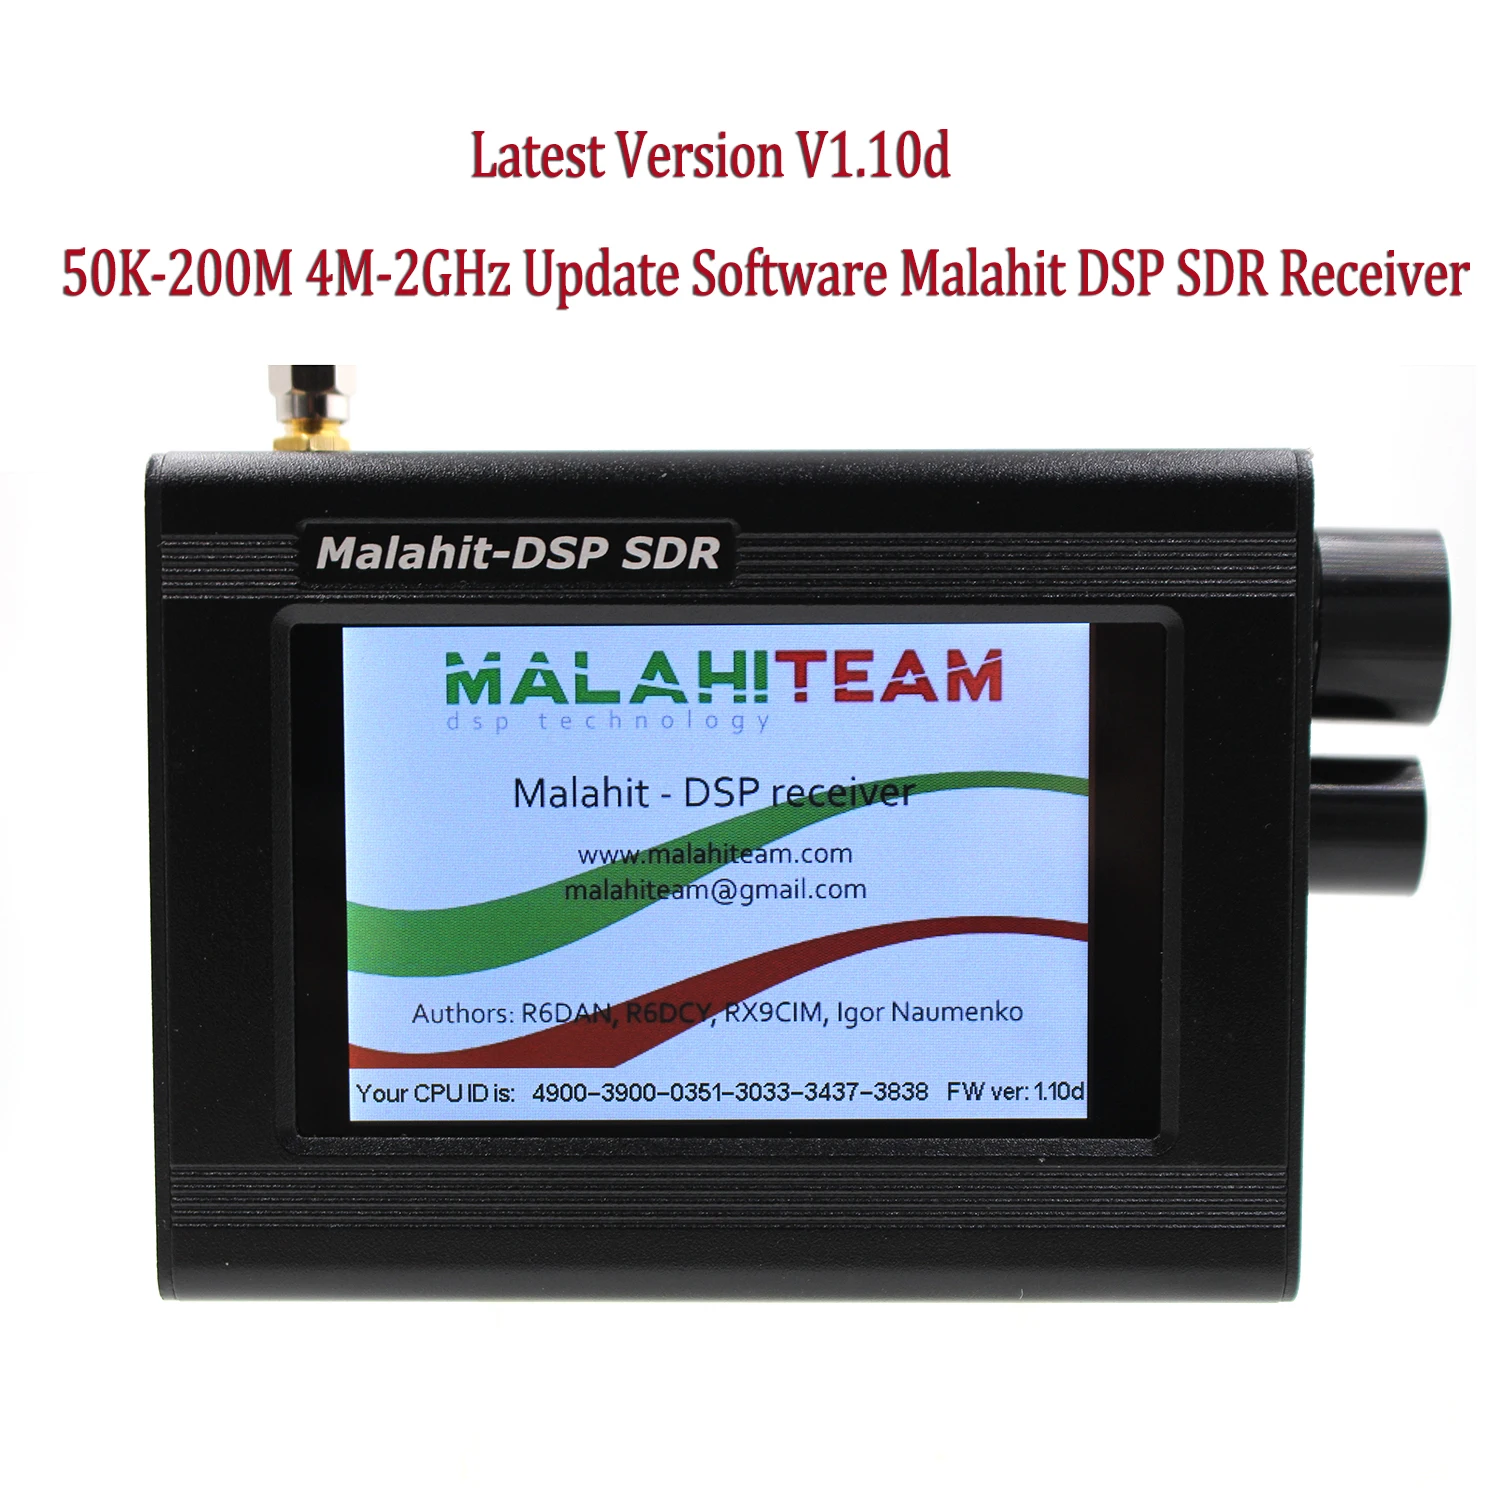 

V1.10D 50K-2Ghz Malachite SDR Radio Update Software Malahit DSP SDR Receiver/3.5"LCD/Battery /Speaker/Metal Case with All Mode R